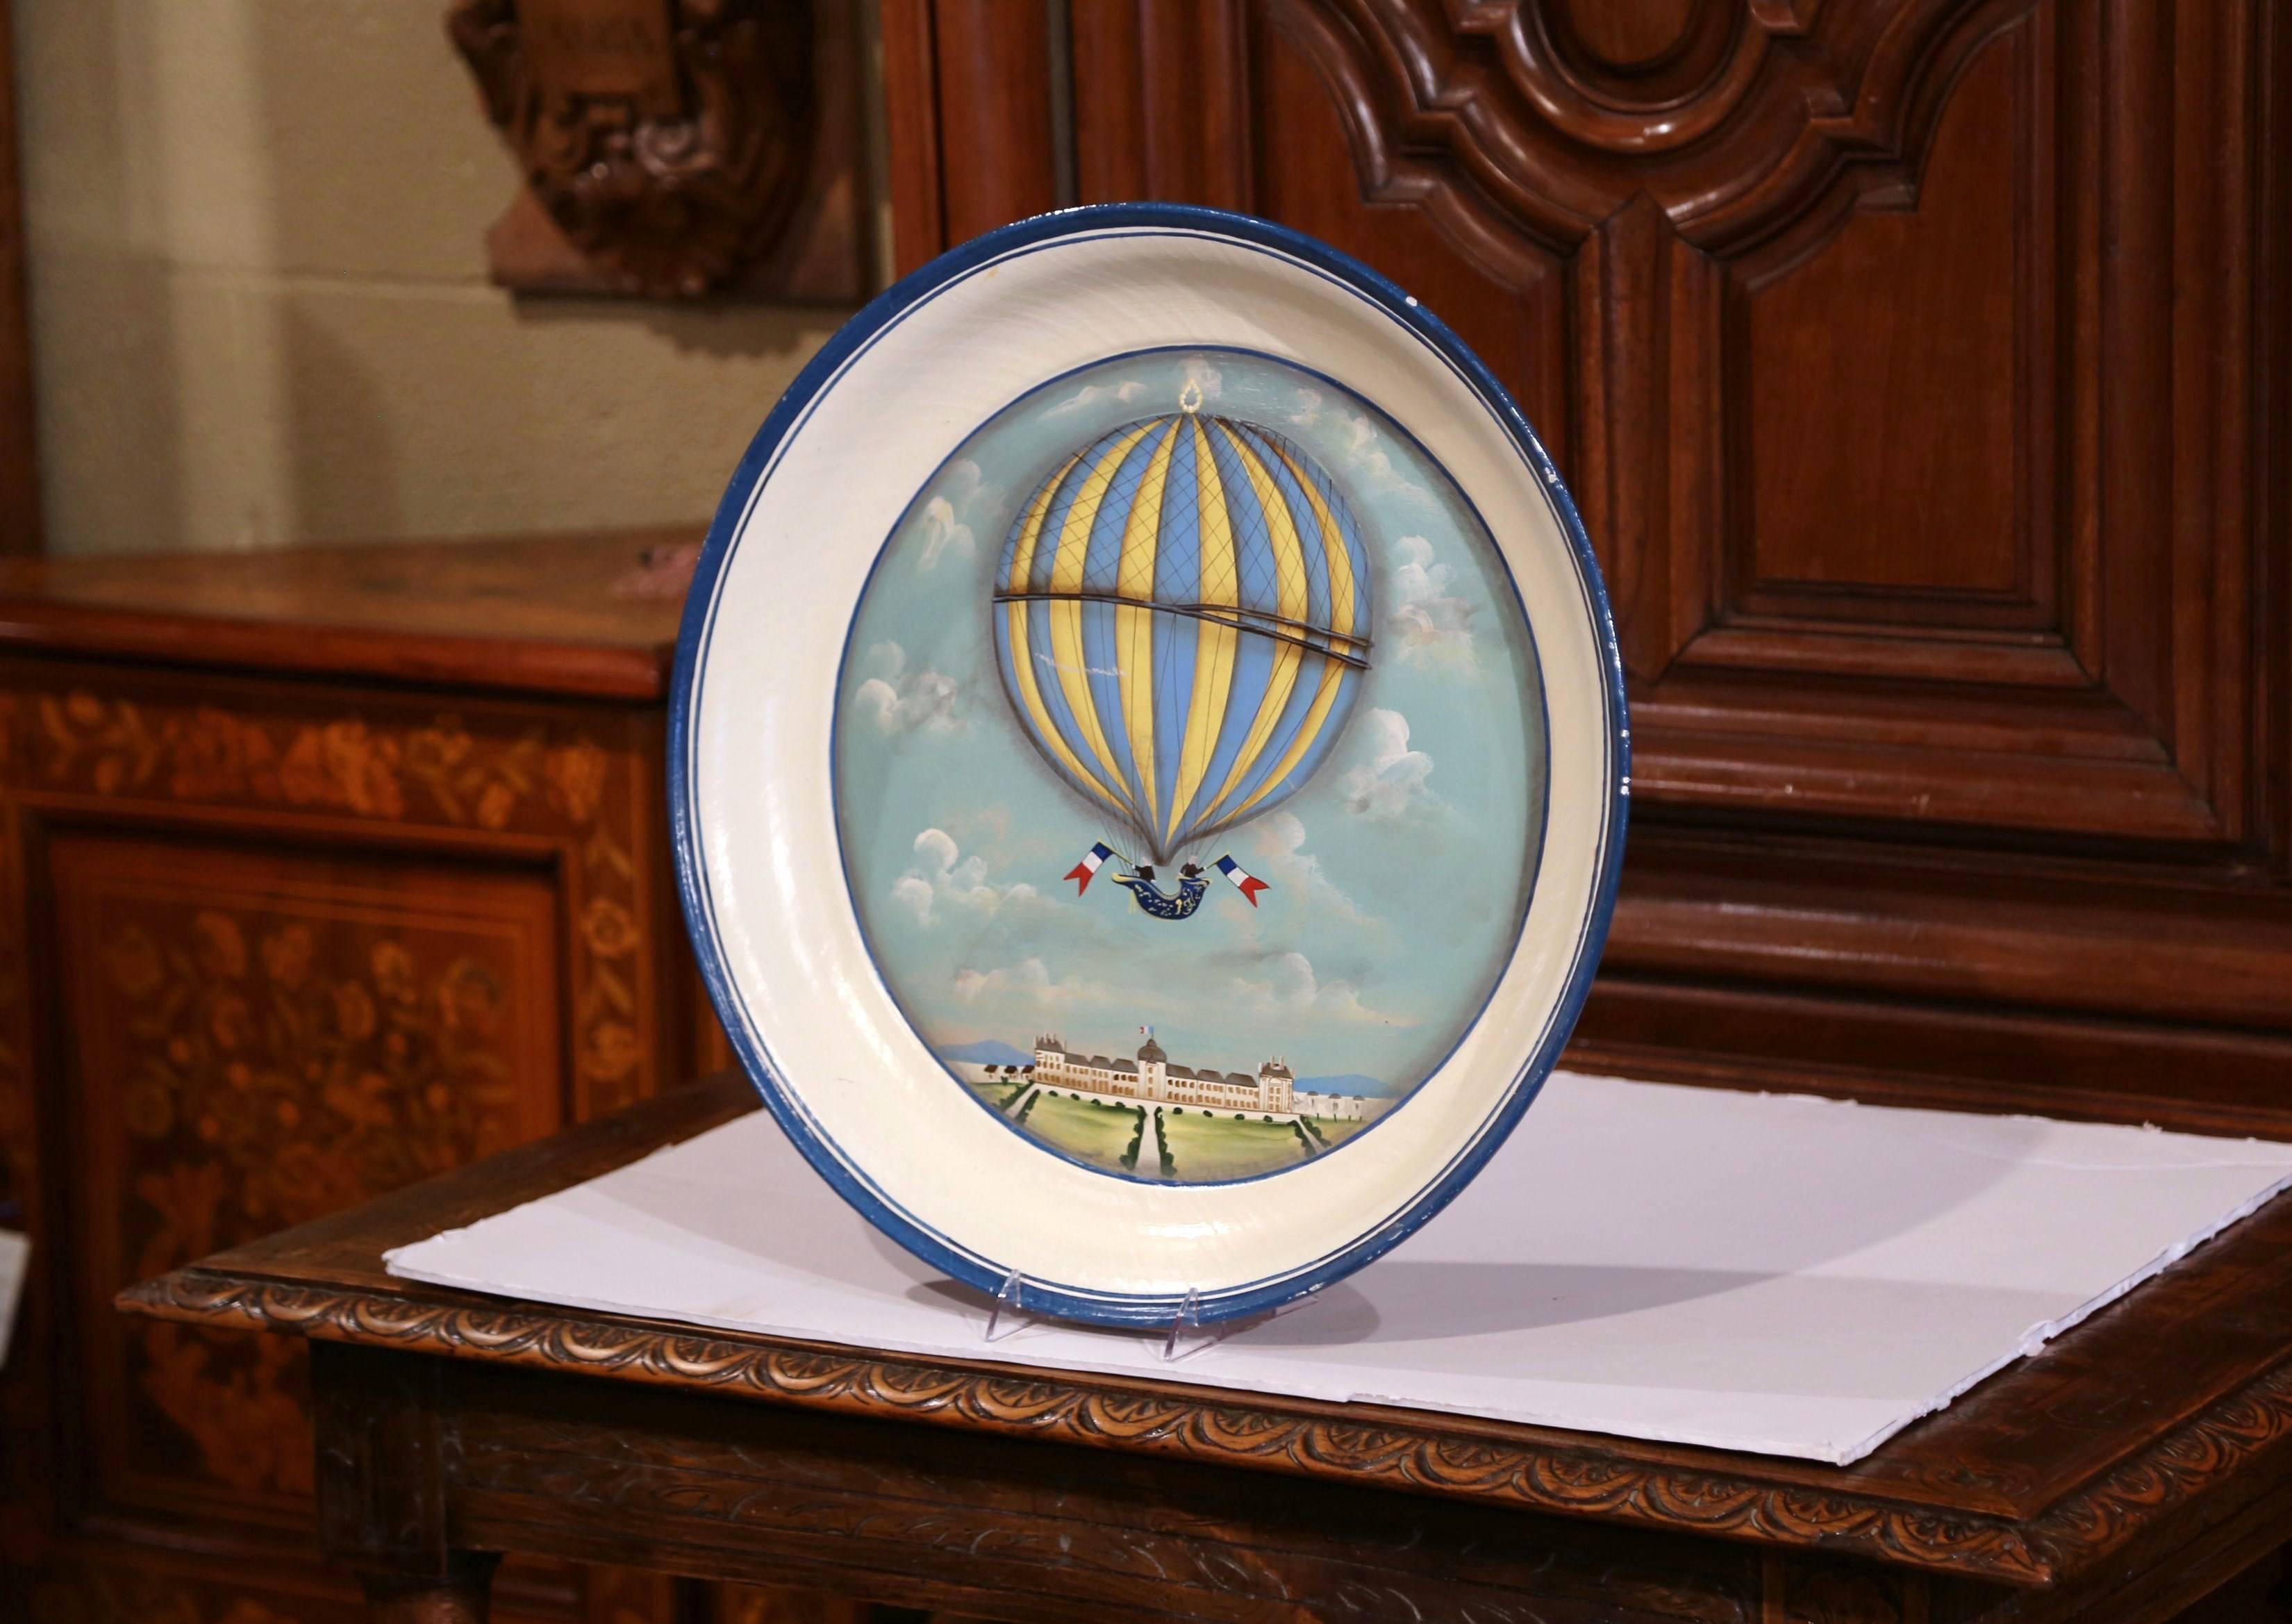 This colorful round tray was crafted in France circa 2000; the decorative piece features a blue and yellow hot air balloon flanked on both sides by the French tricolor flag and flying over a chateau in the background. Excellent condition with rich